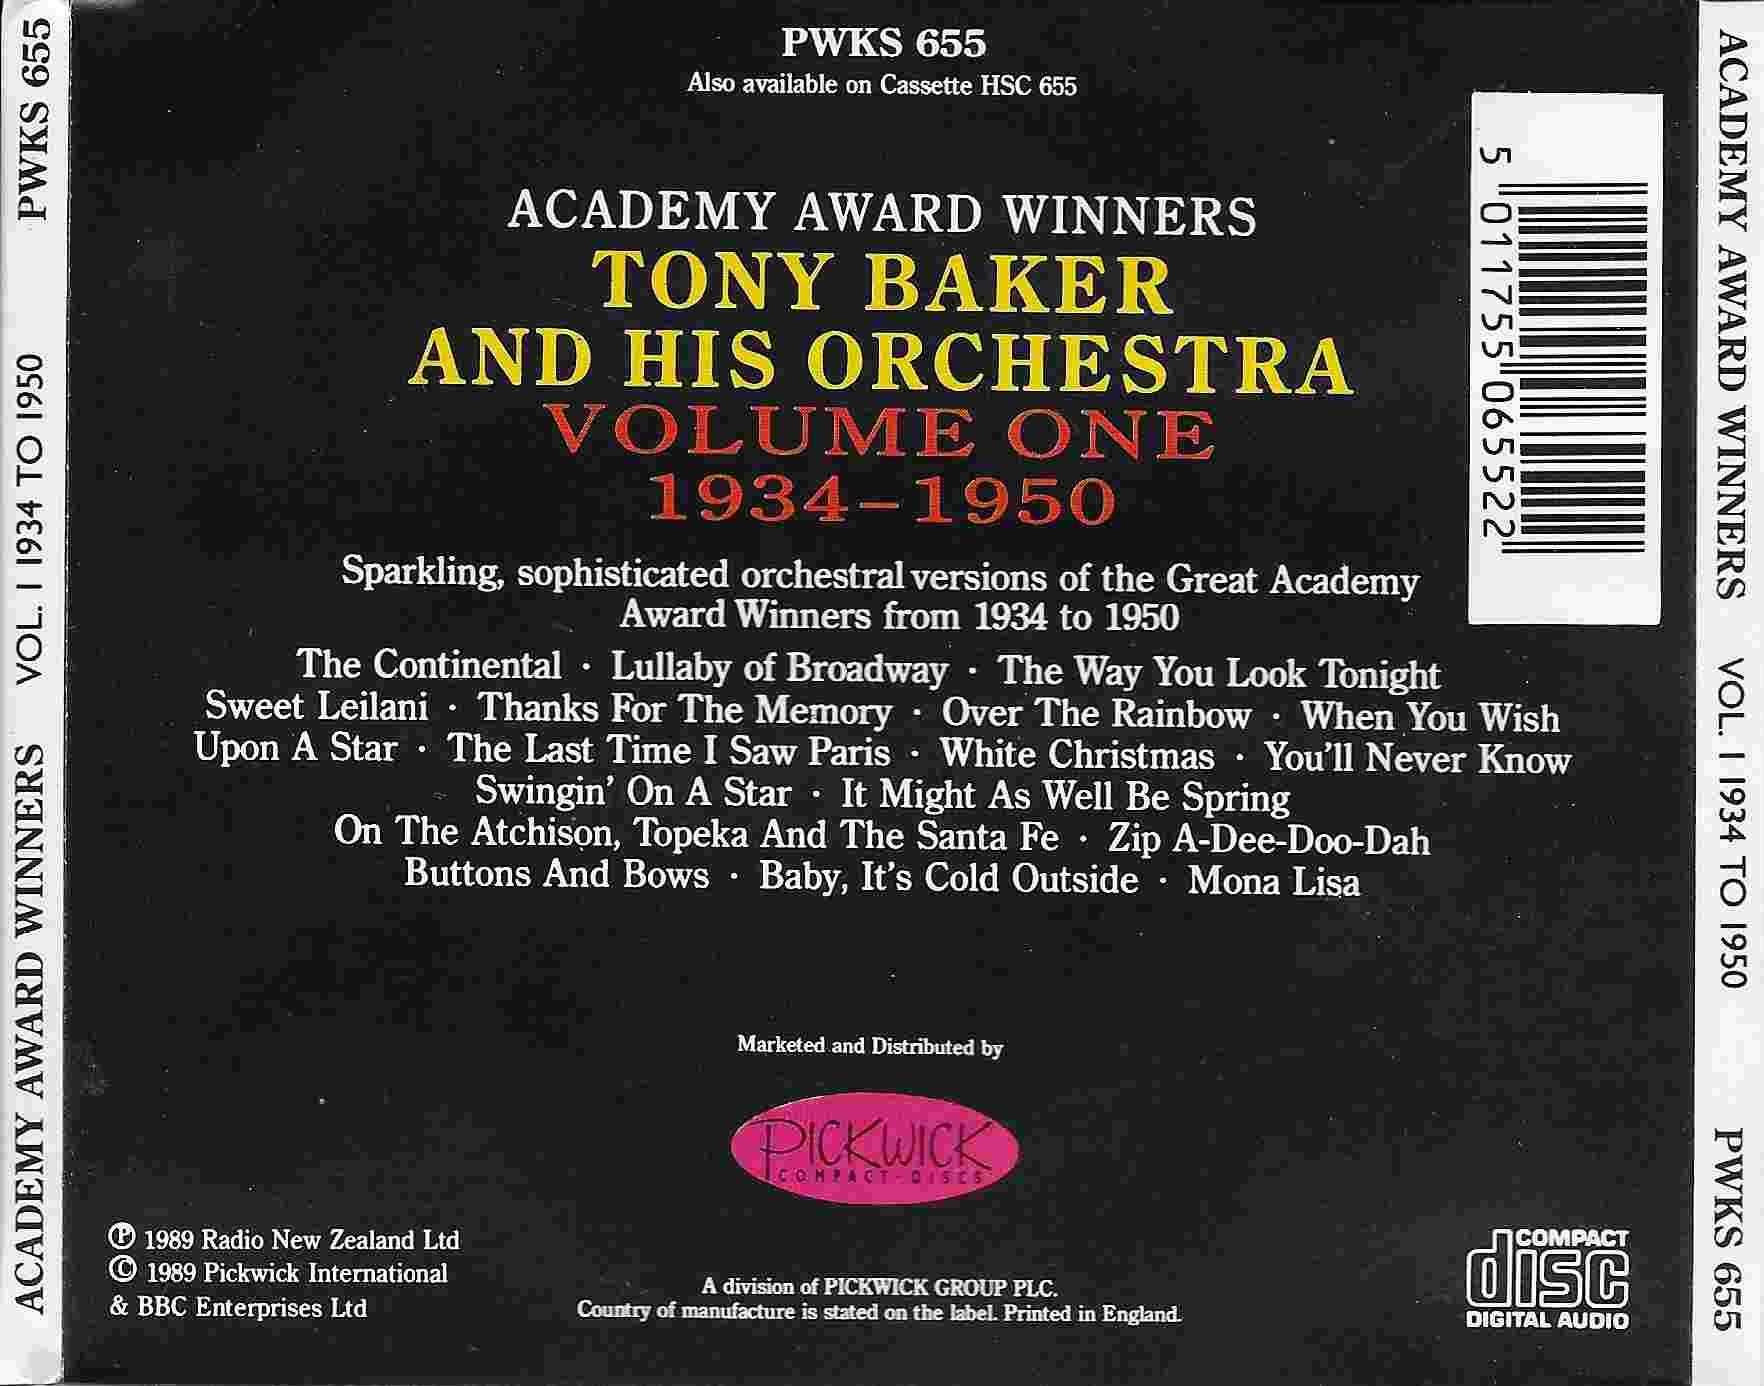 Picture of PWKS 655 Academy award winners, volume one 1934 - 1950 by artist Tony Baker and his orchestra from the BBC records and Tapes library